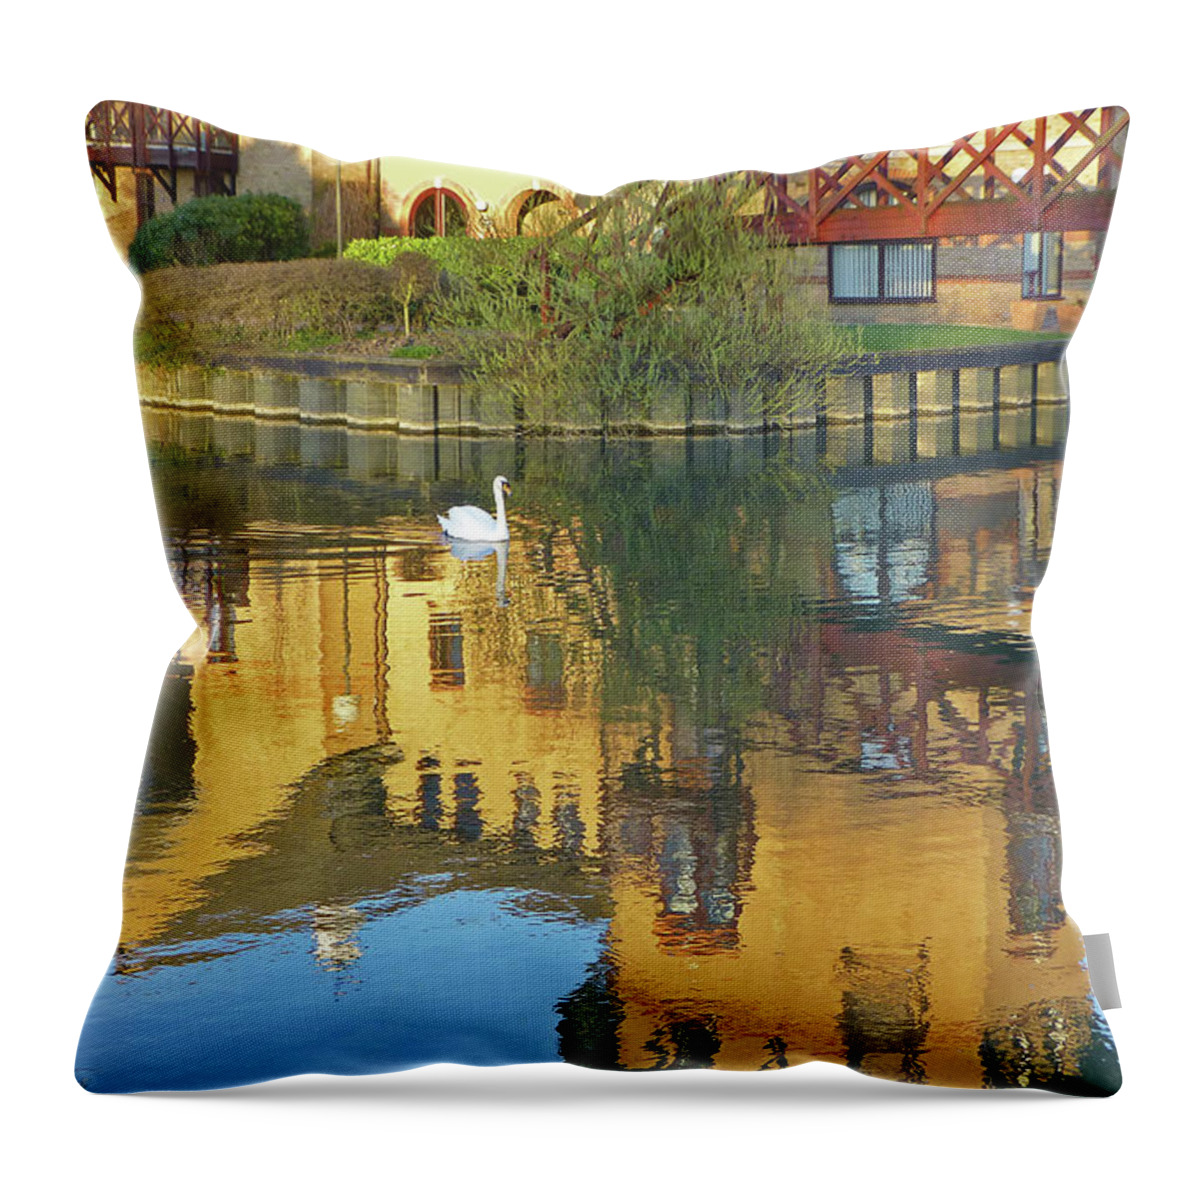 River Throw Pillow featuring the photograph Riverside Homes Reflections by Gill Billington